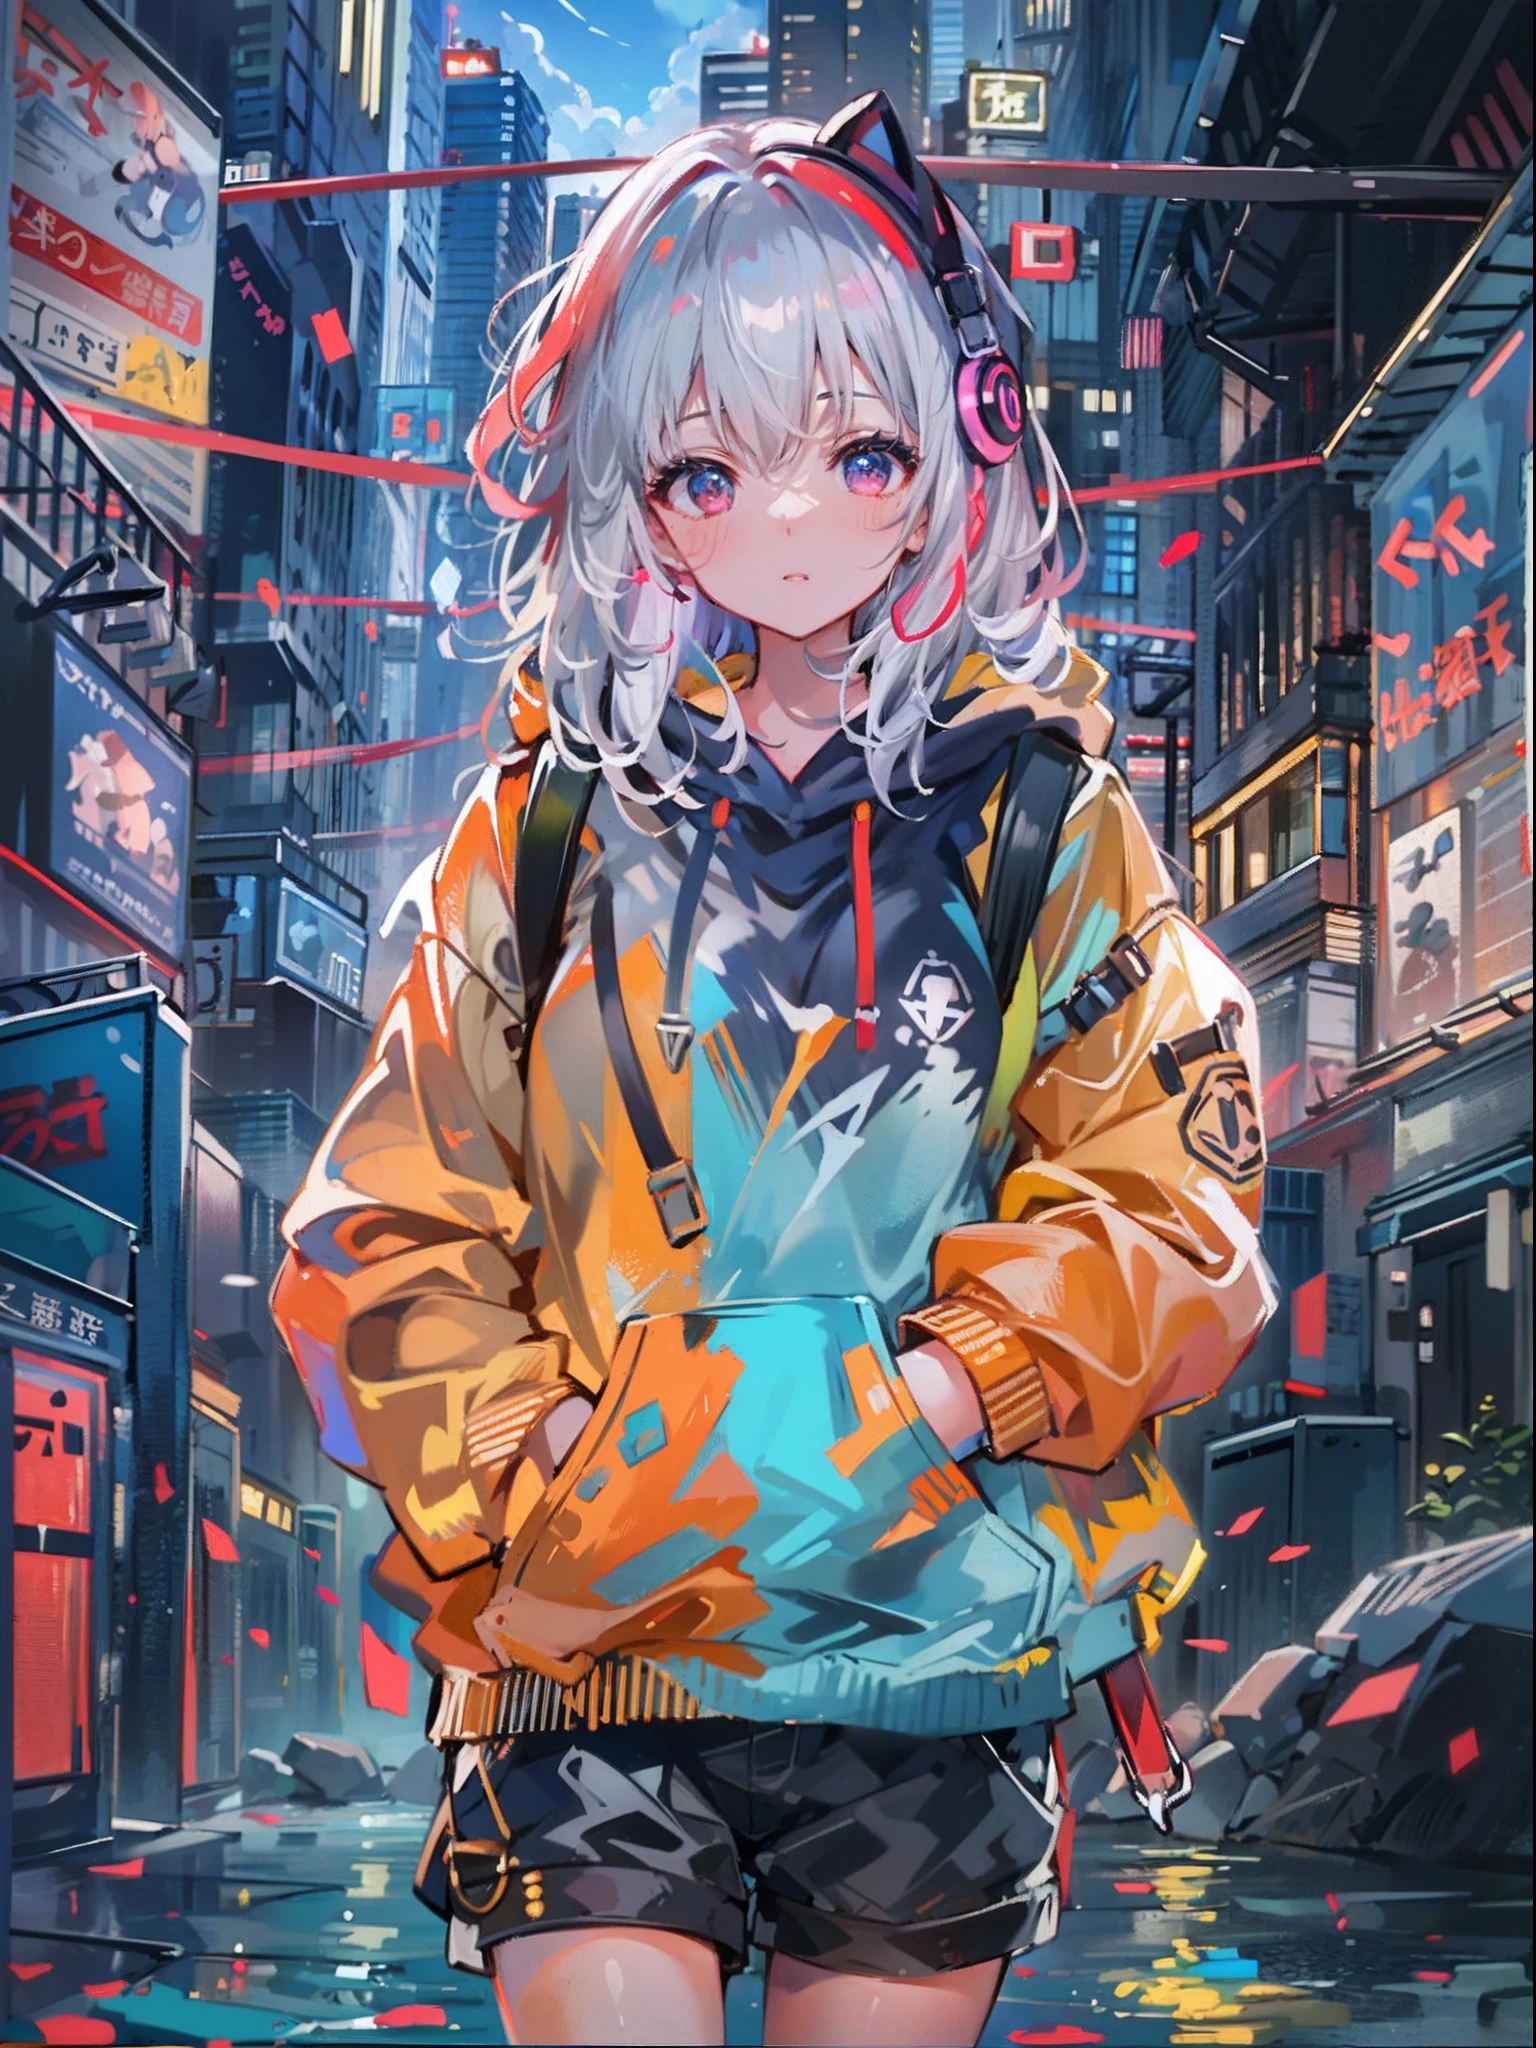 8K resolution、((top-quality))、((masterwork))、((Ultra-detail))、1 woman、solo、incredibly absurdness、Oversized Hoodies、headphones、street、plein air、Sateen、neons、Shortcut Hair、Brightly colored eyes、Hands in pockets、shortpants、water dripping